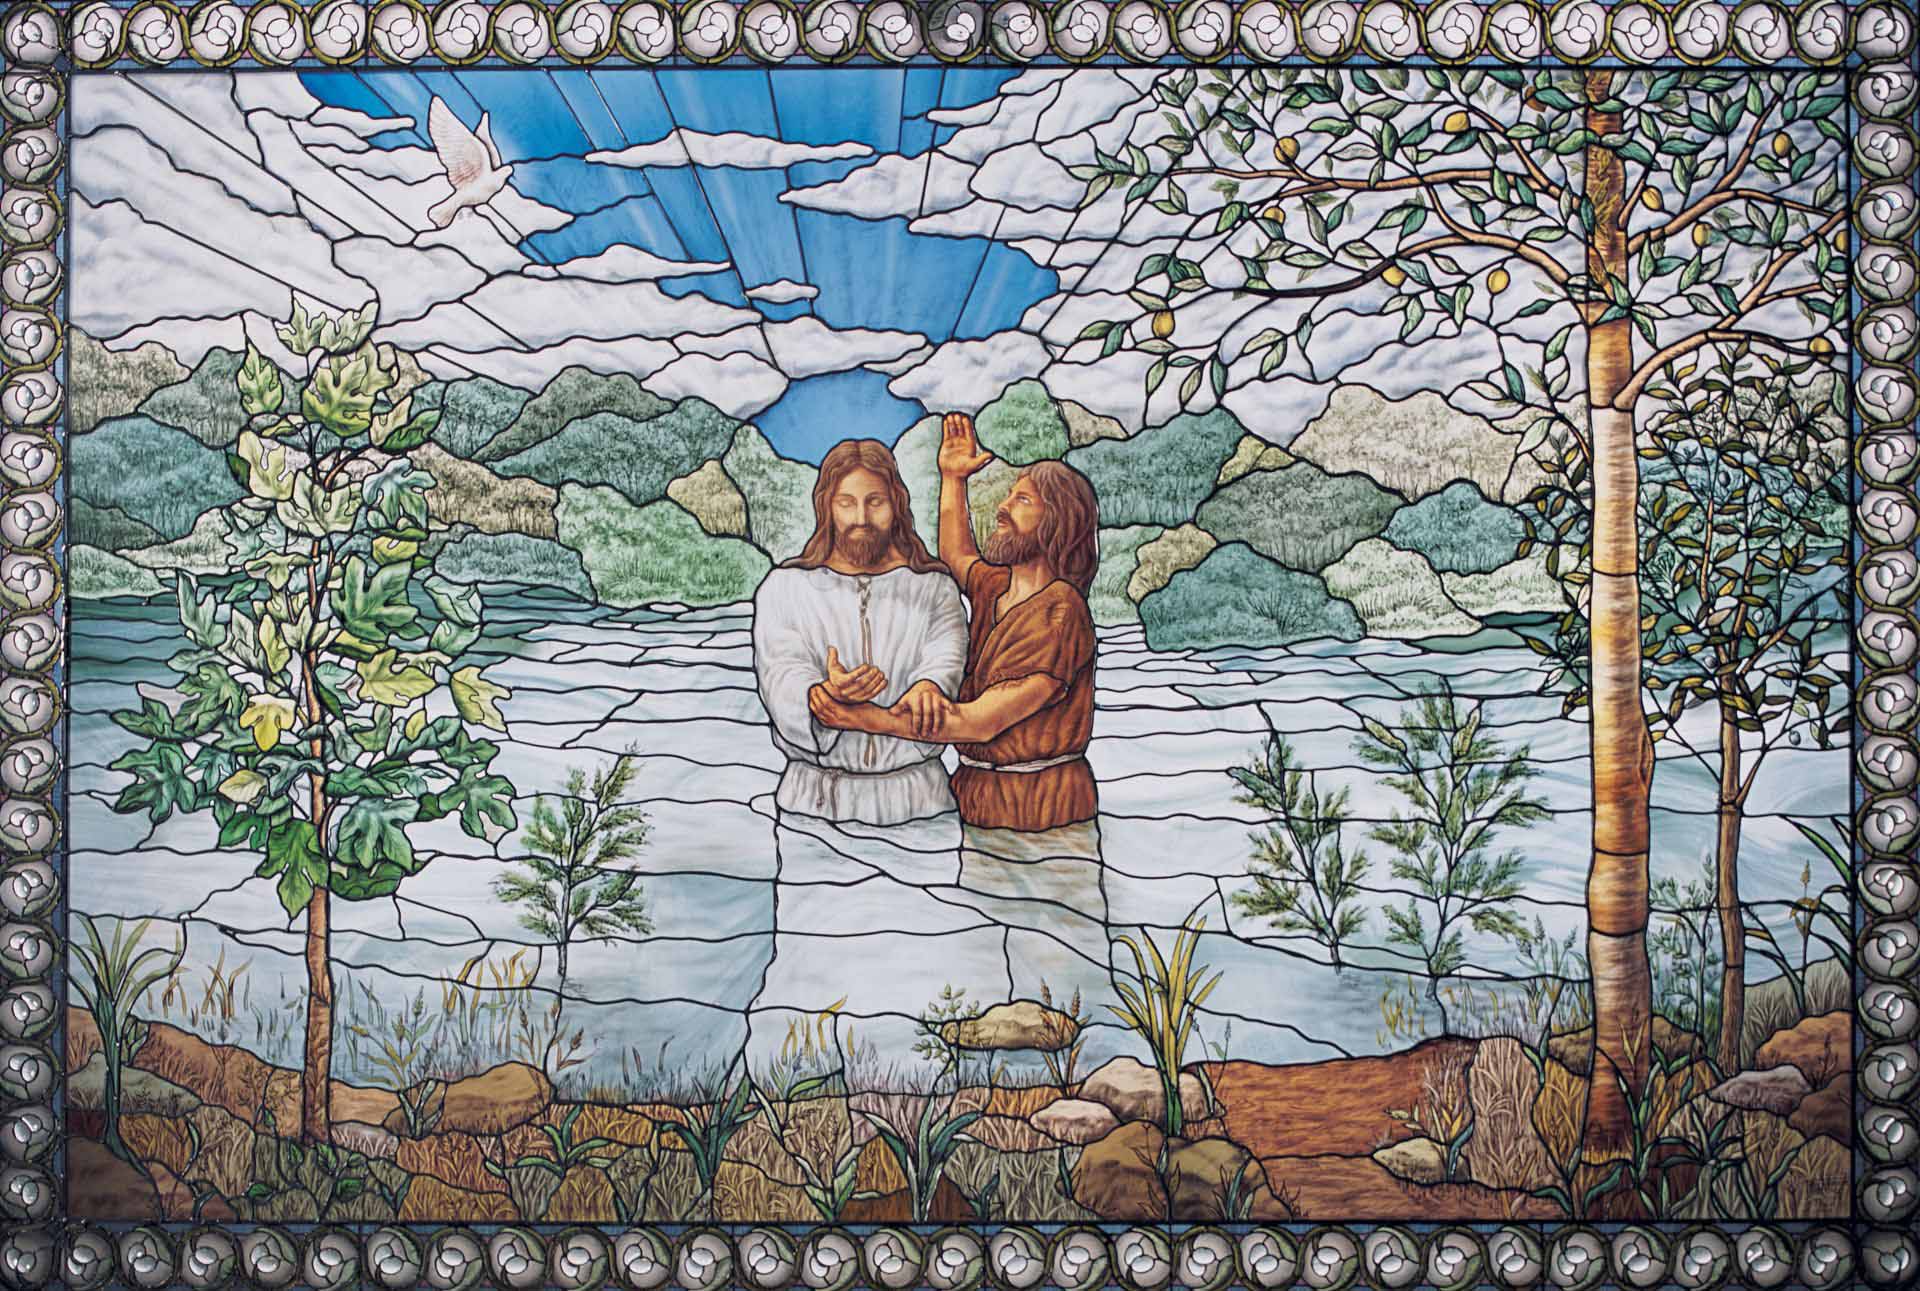 Stained-glass window in Nauvoo Illinois Temple, by Tom Holdman. Image via Church of Jesus Christ.